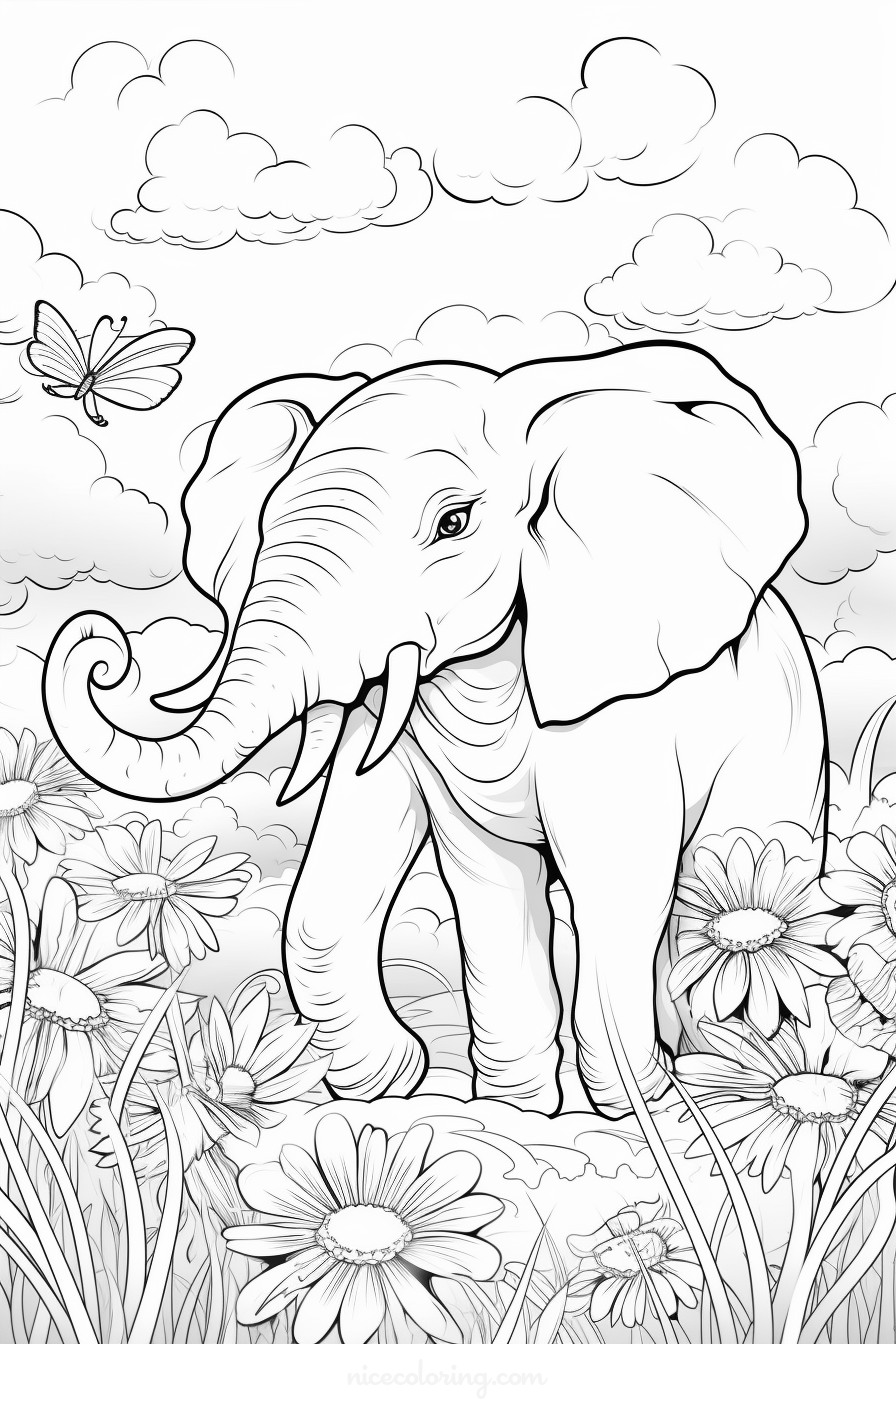 An elephant standing under a tree coloring page